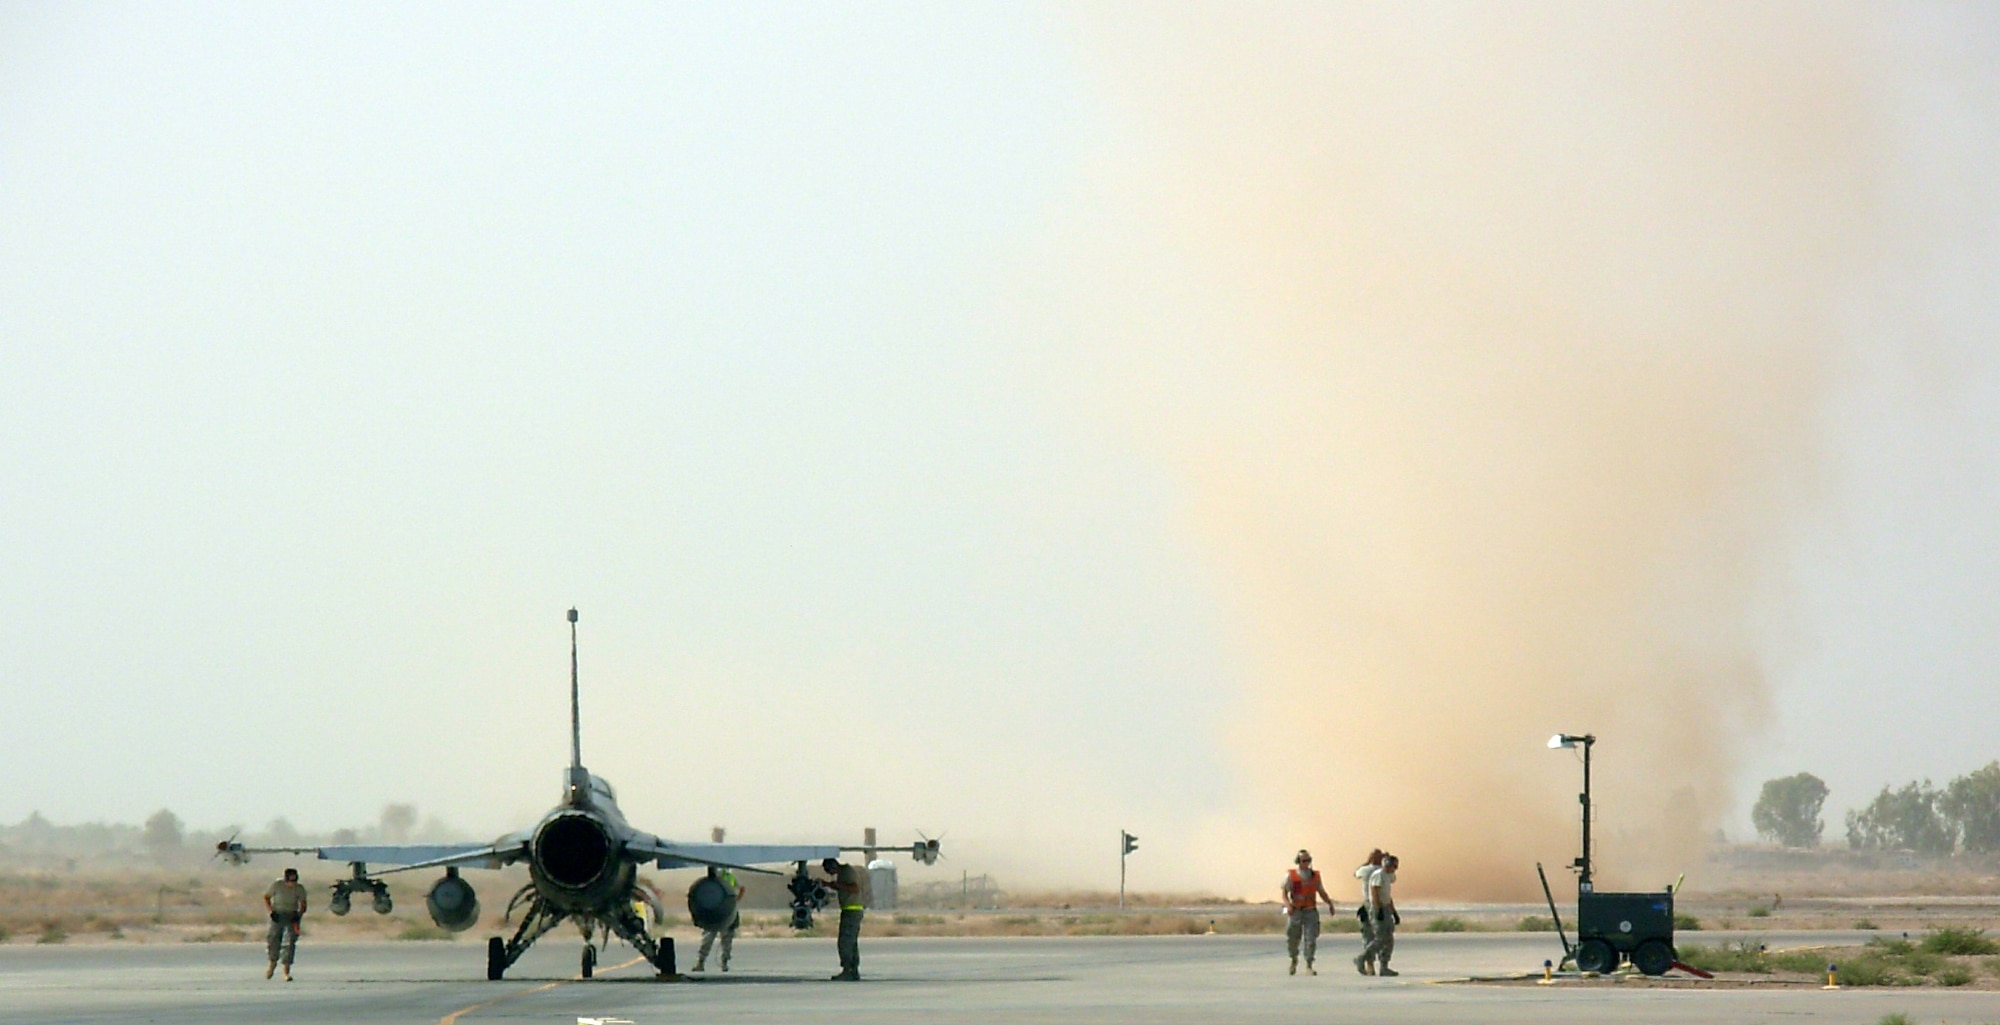 JOINT BASE BALAD, Iraq -- A dust devil blows through the airfield near an F-16 Fighting Falcon here Aug. 28. The aircraft was in the north de-arm area after returning from a mission. The flat terrain, clear skies and light wind typical of summers here makes dust devils a common phenomenon. While they can reach more than 1,000 meters in height, they are much less intense than tornadoes. (U.S. Air Force photo/Capt. Jeffrey Godzik)